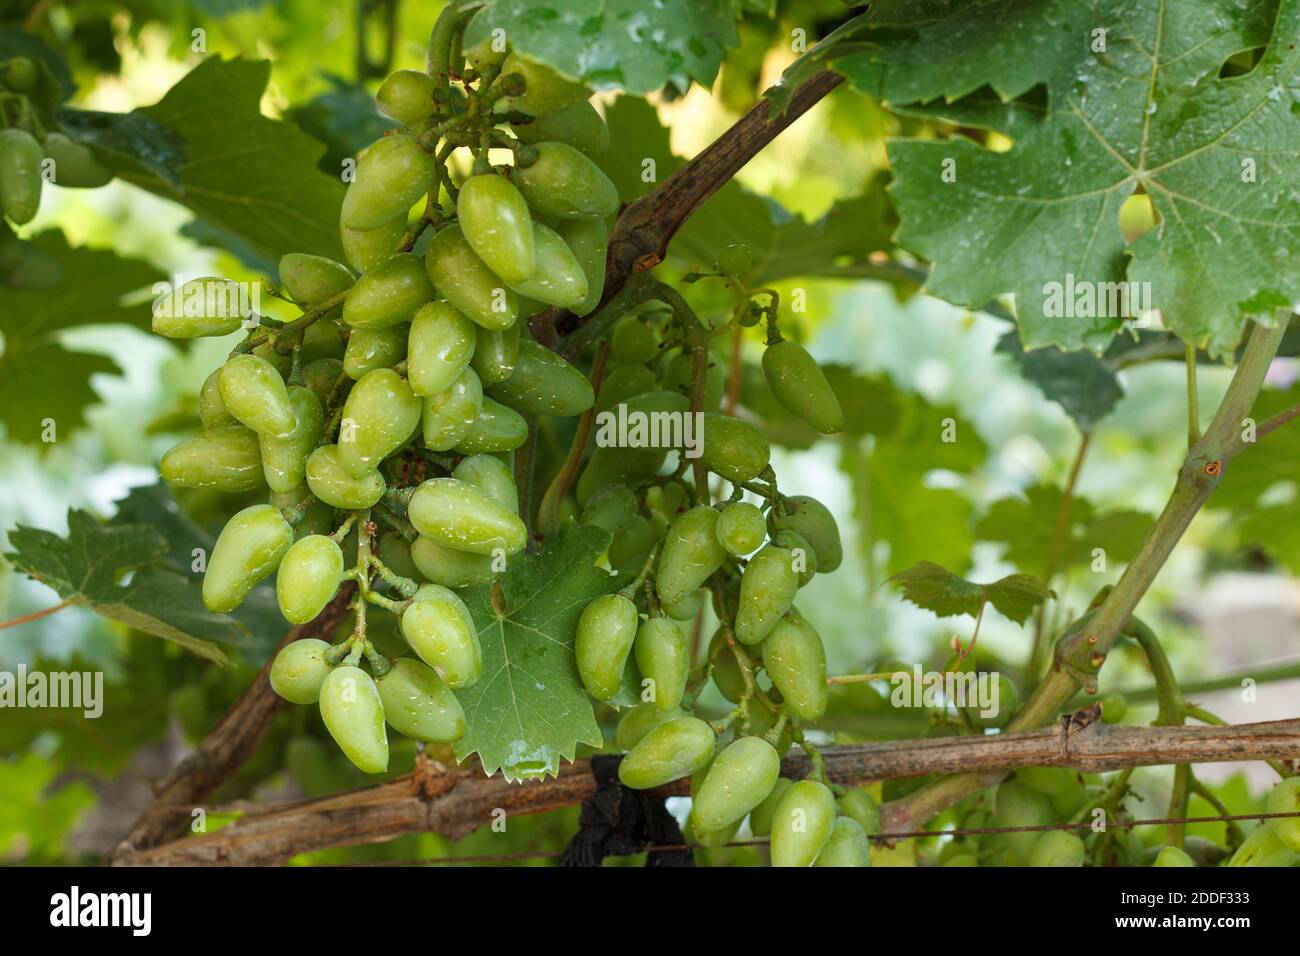 Bunch of unripe white grapes on the bush after spraying to protect fungal diseases. Shallow depth of field. Stock Photo